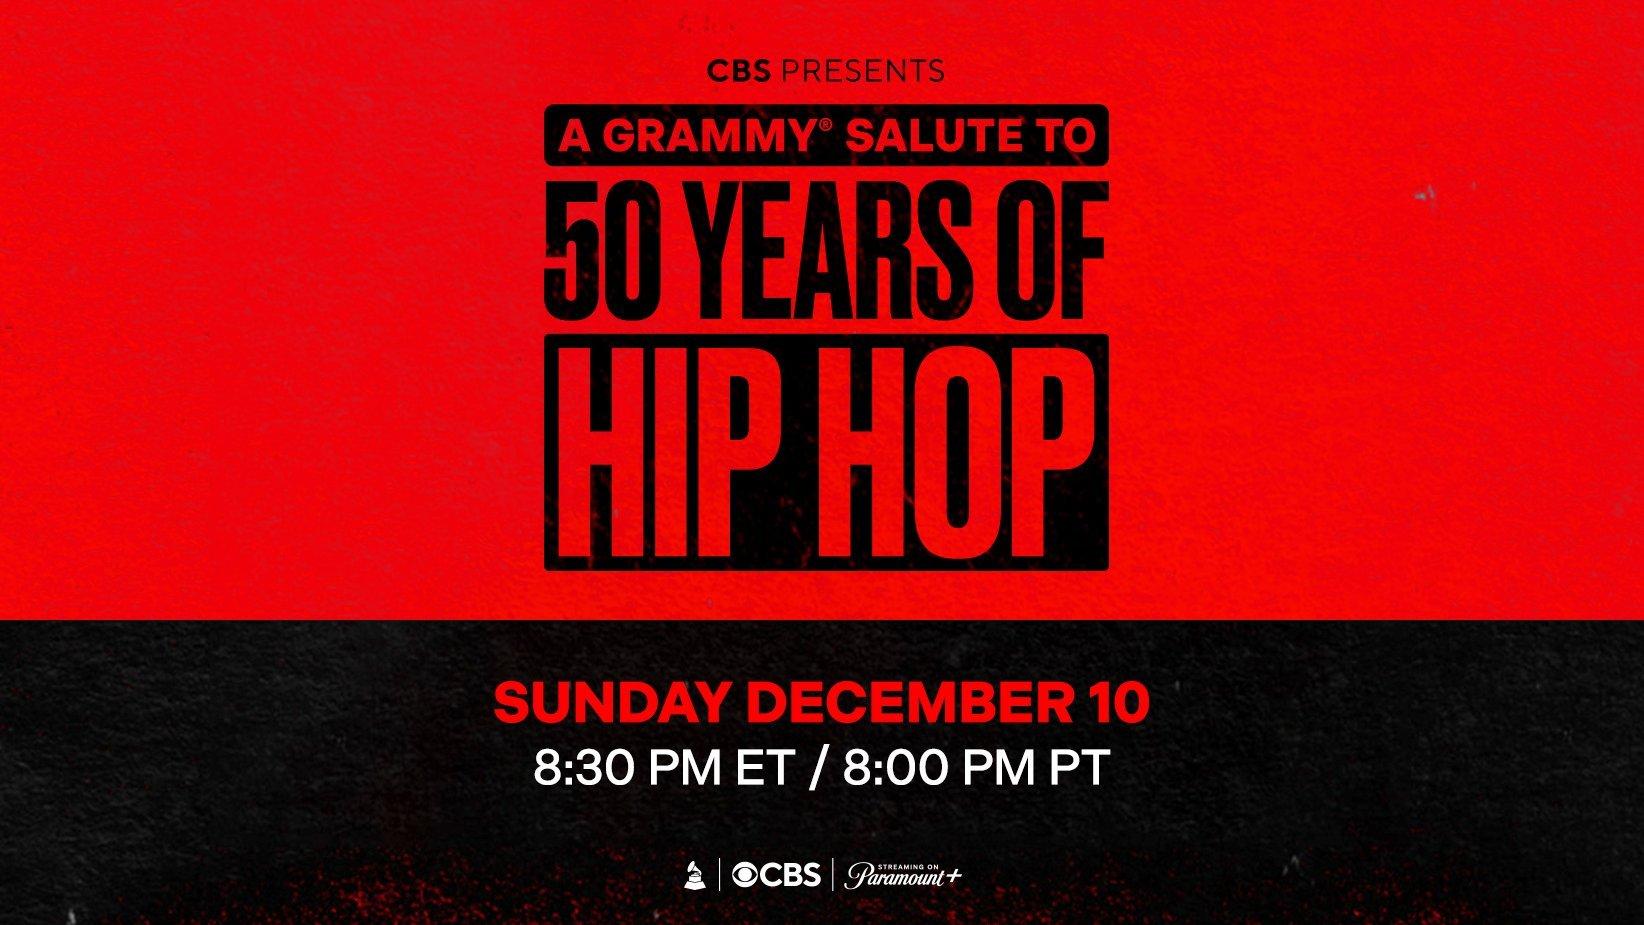 "A GRAMMY Salute To 50 Years Of HipHop" Airs Sunday, Dec. 10 Save The